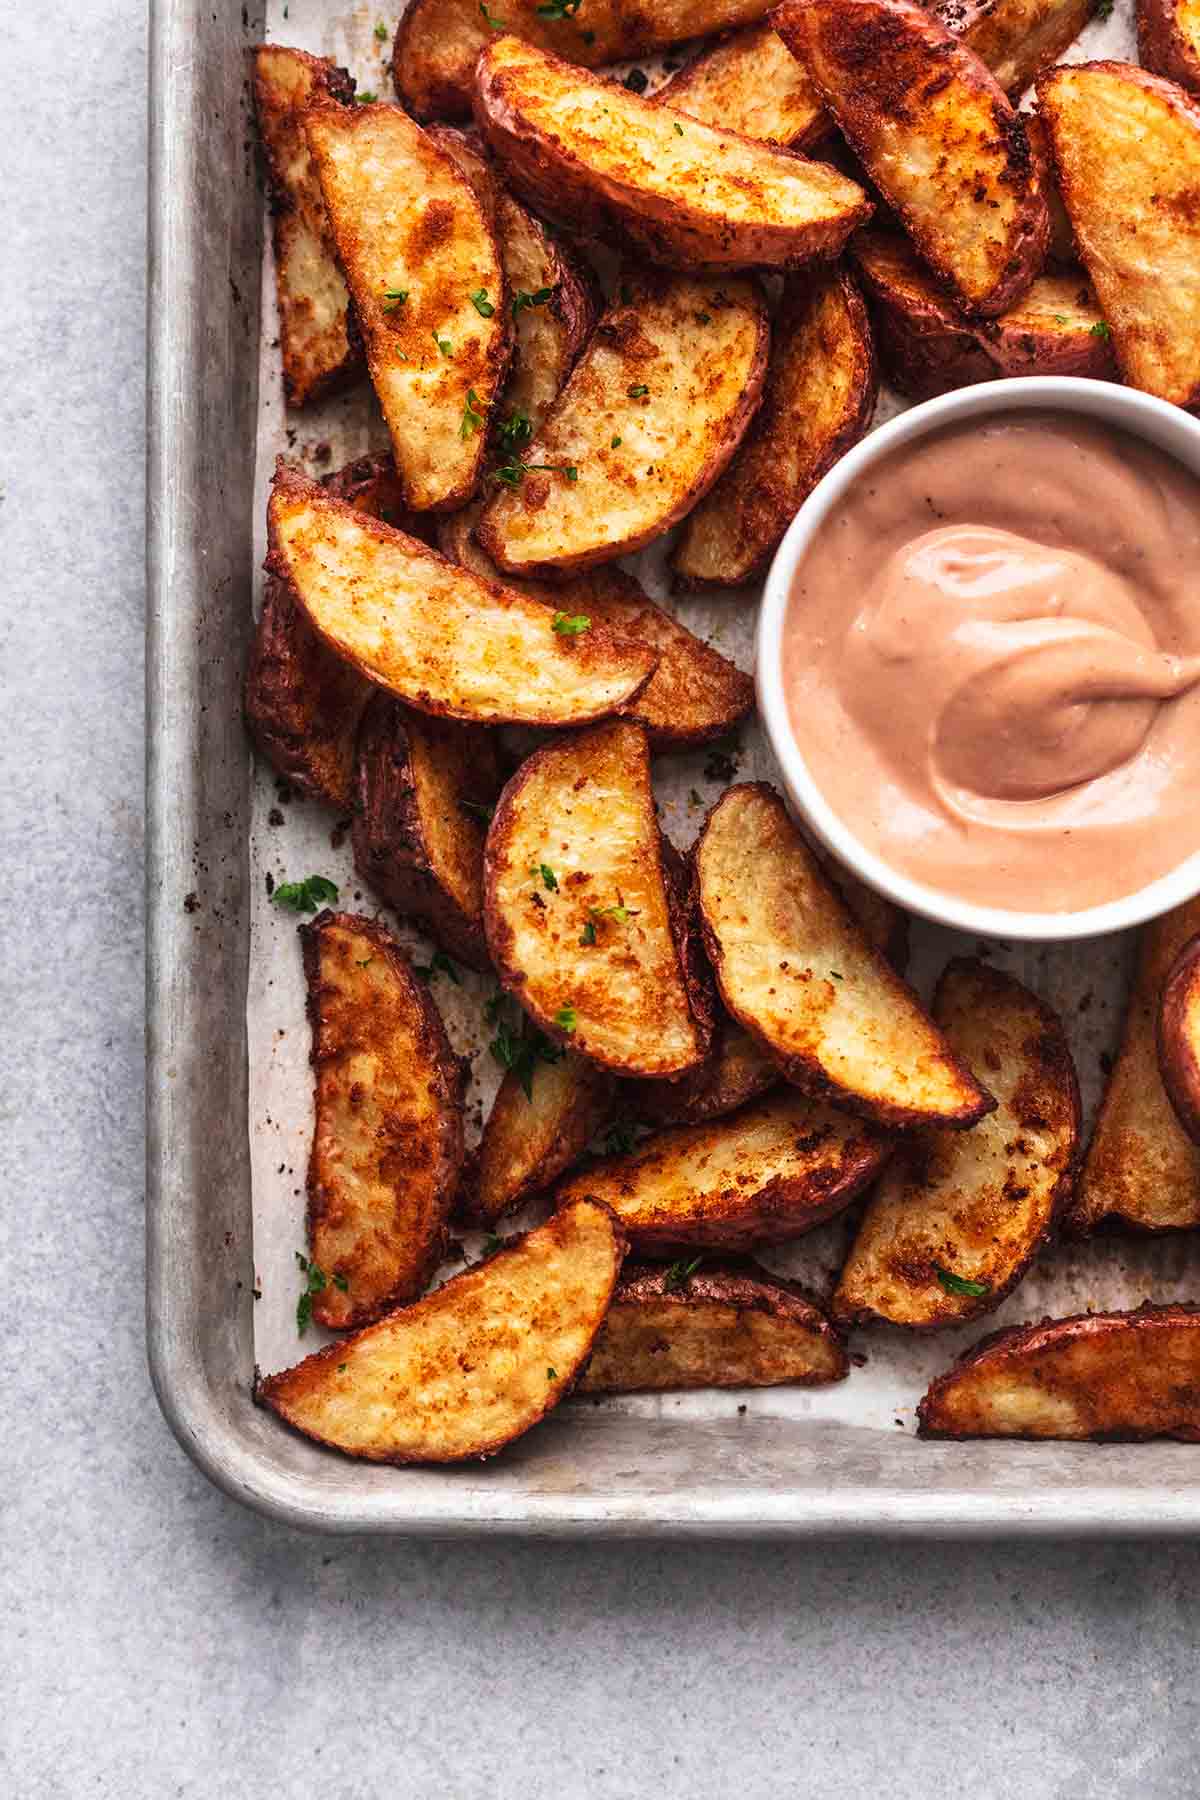 Potato wedges on a baking tray with a small bowl of pink sauce.